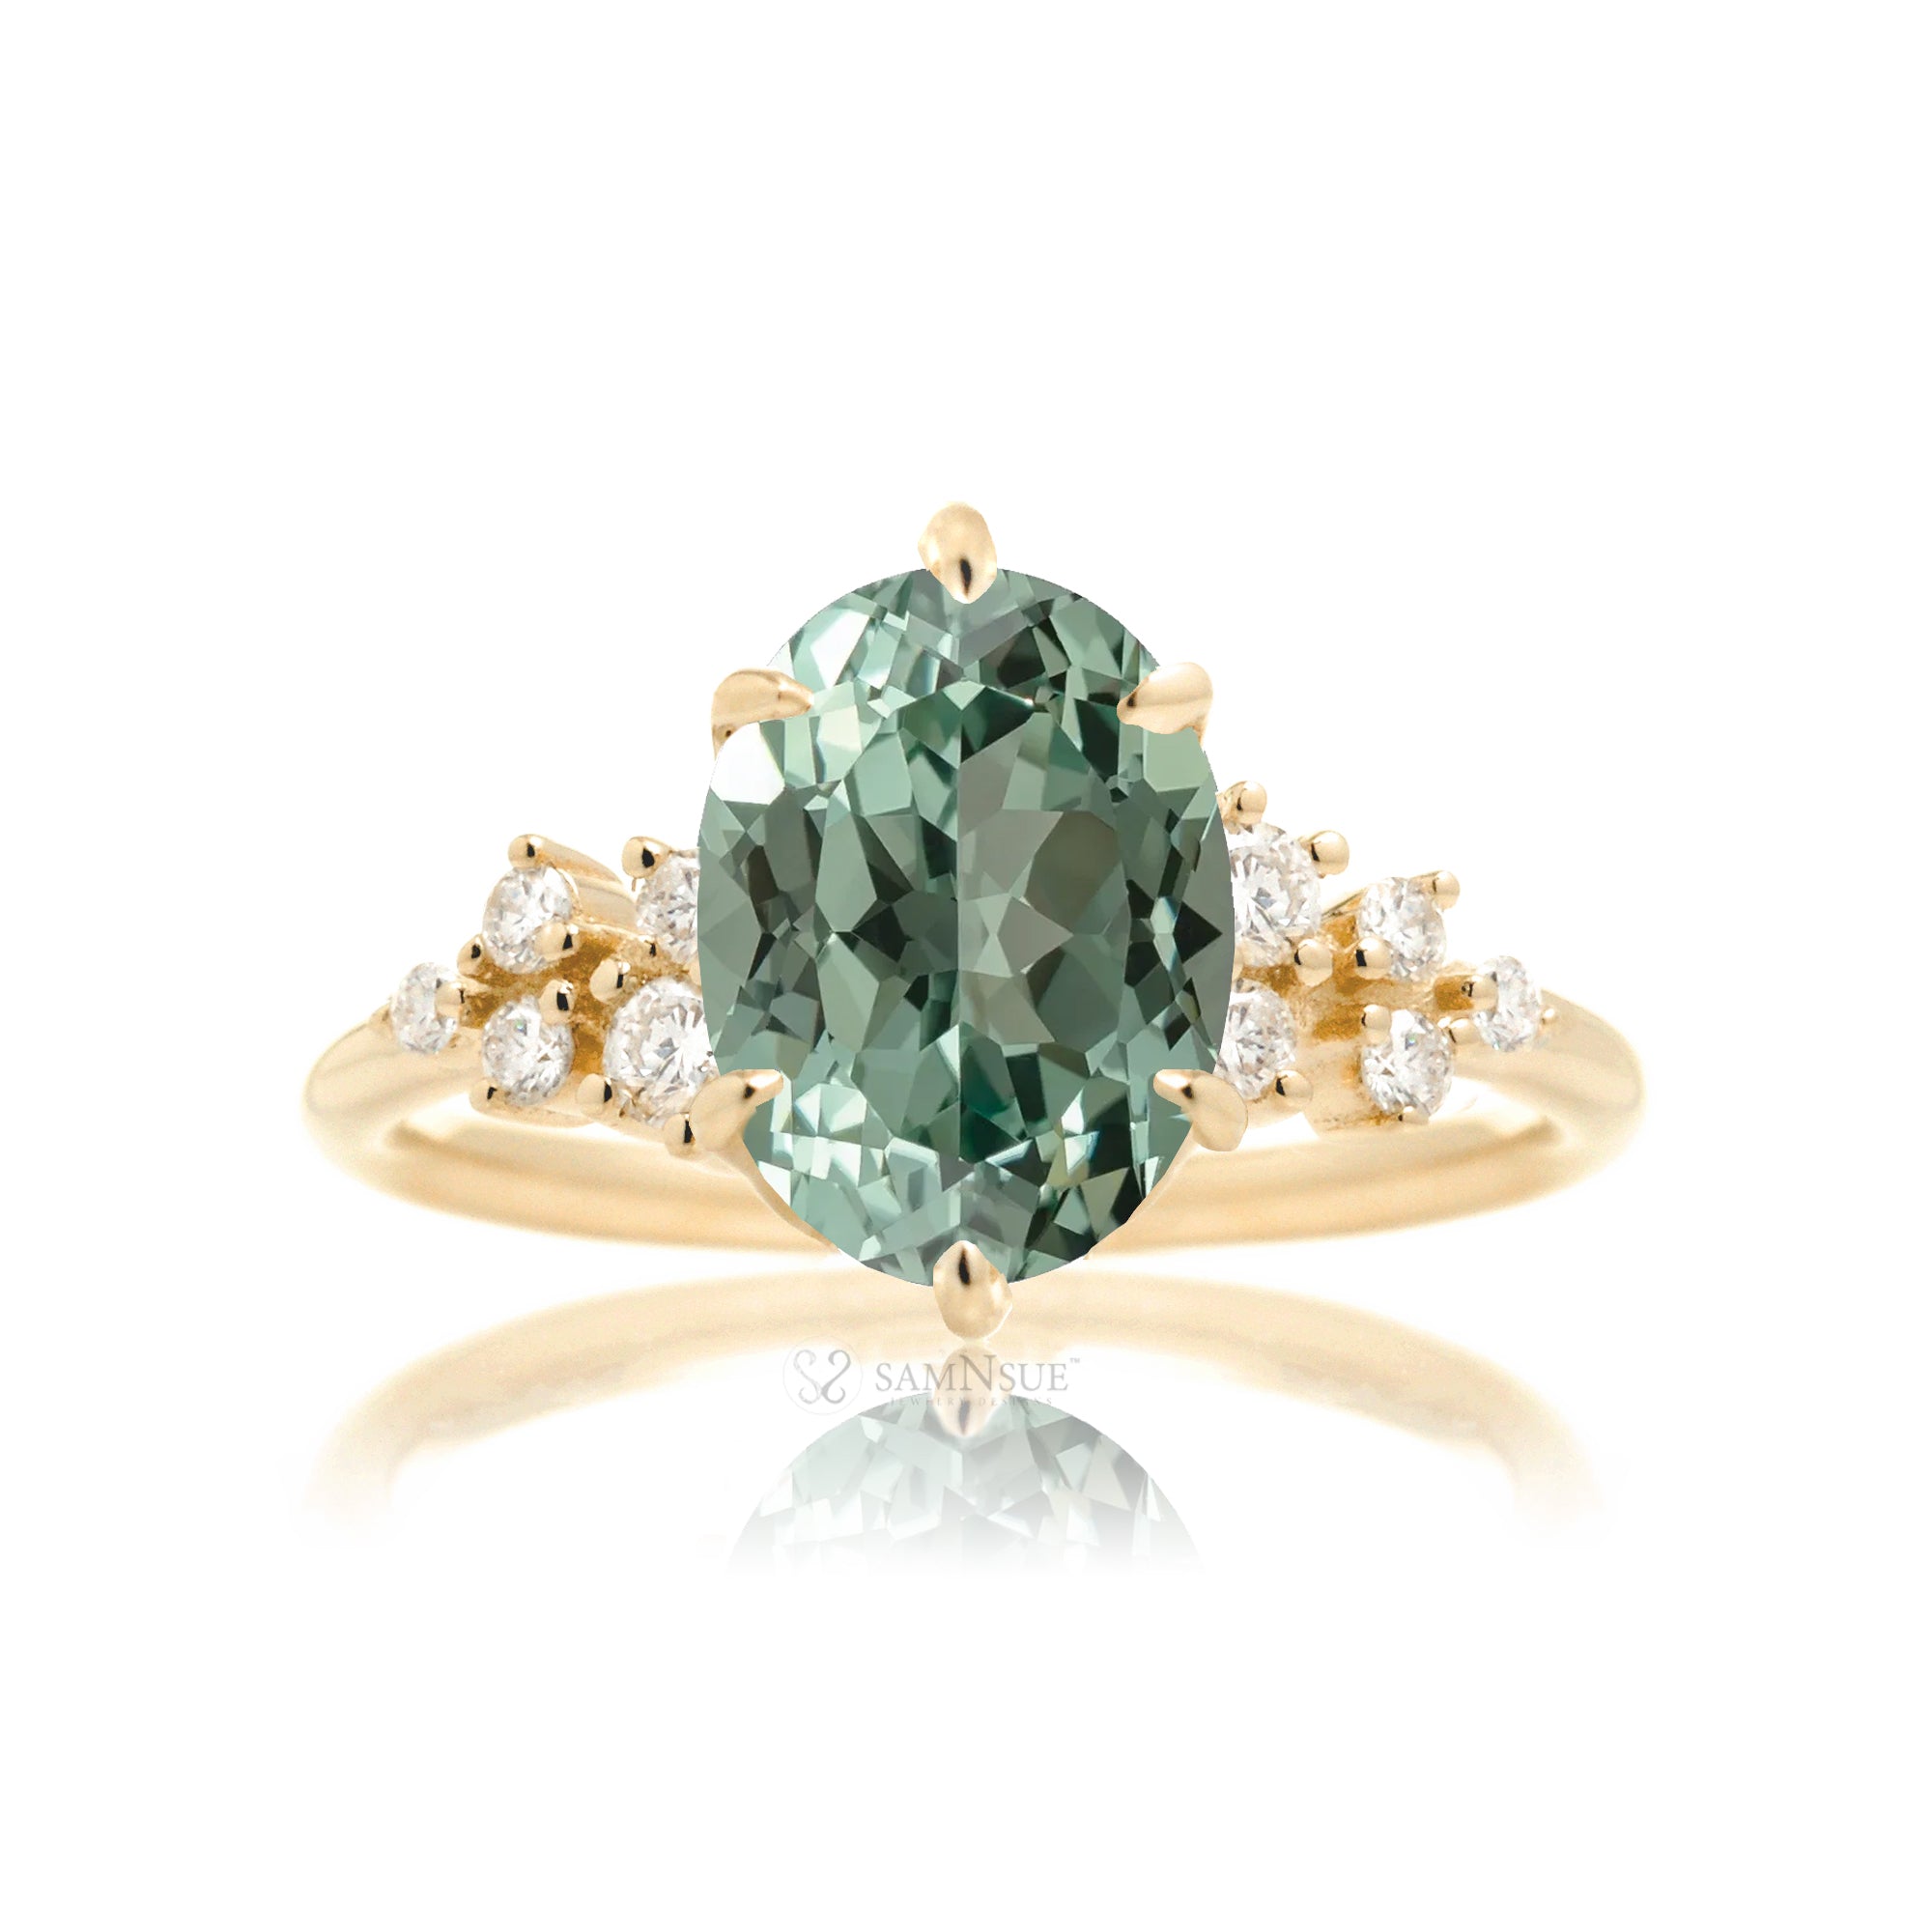 Green sapphire ring oval cut with diamond accent in yellow gold